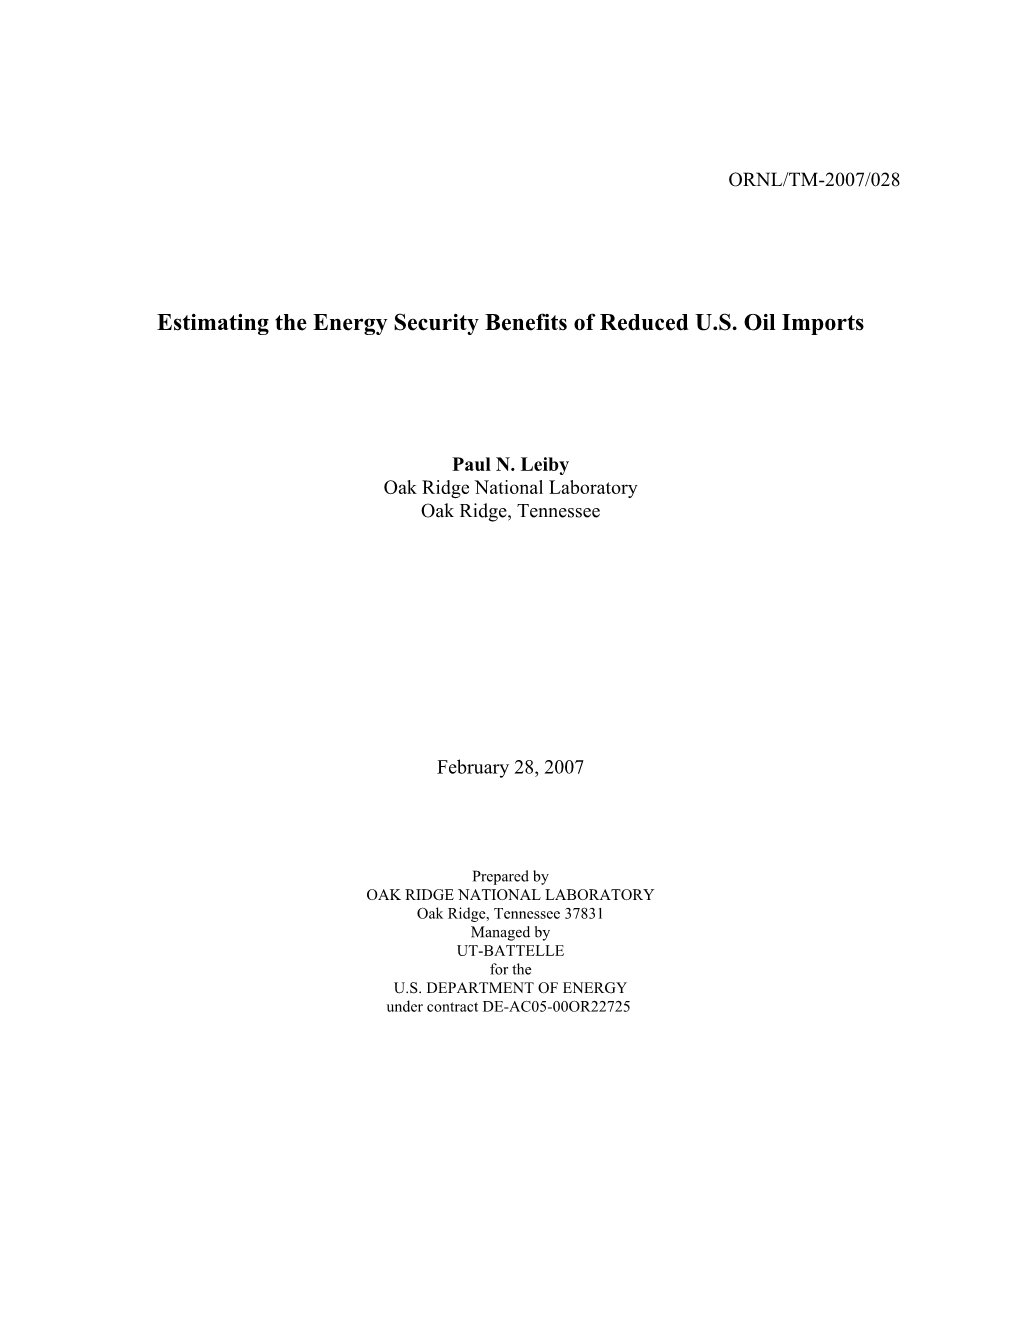 Estimating the Energy Security Benefits of Reduced U.S. Oil Imports